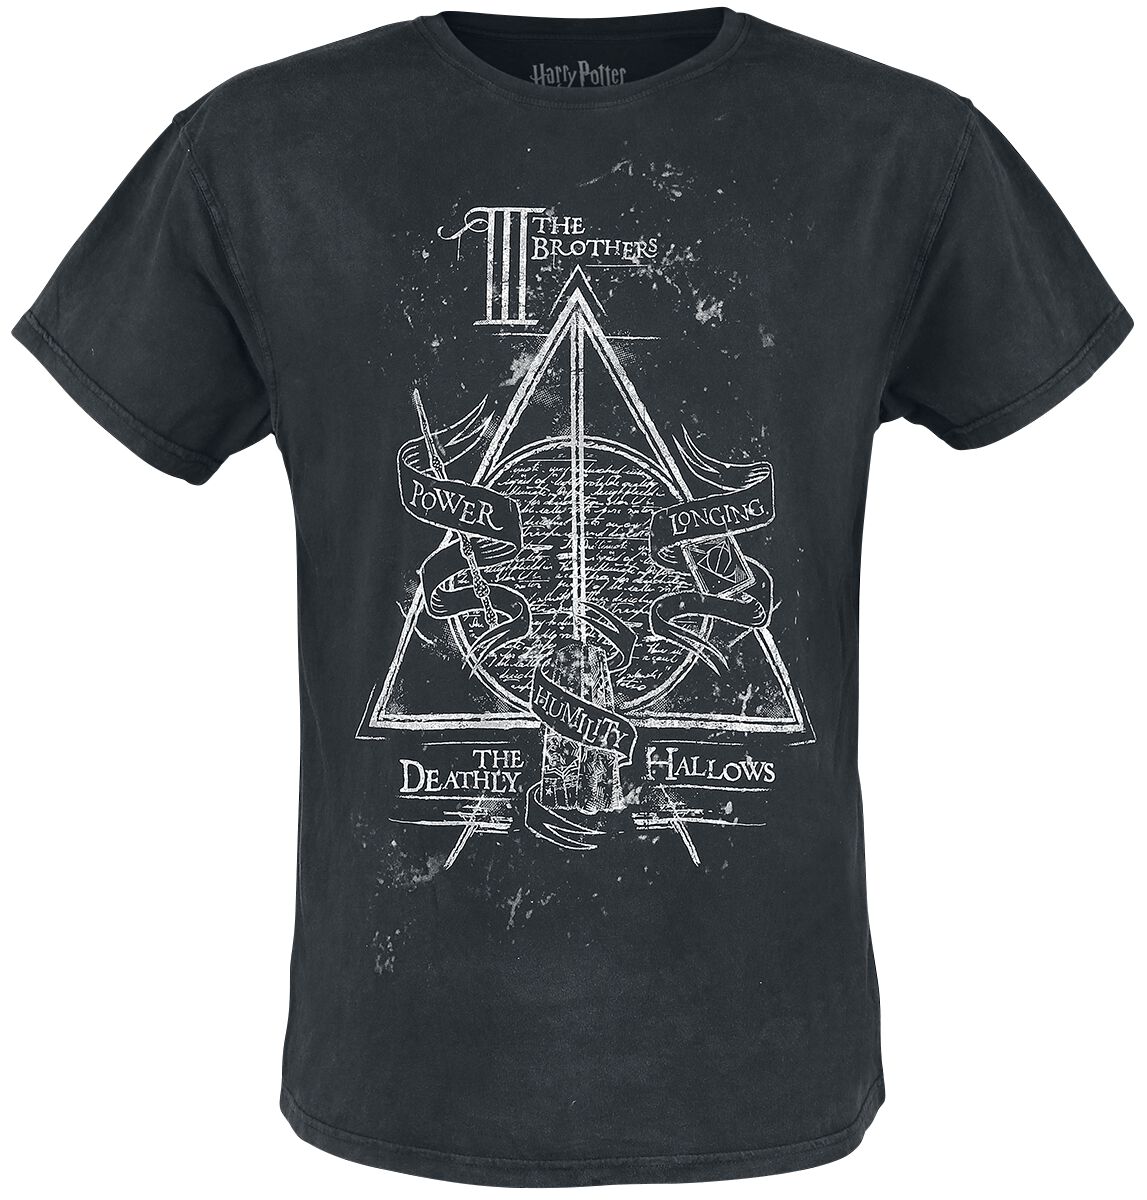 Harry Potter The Deathly Hallows T-Shirt schwarz in XL